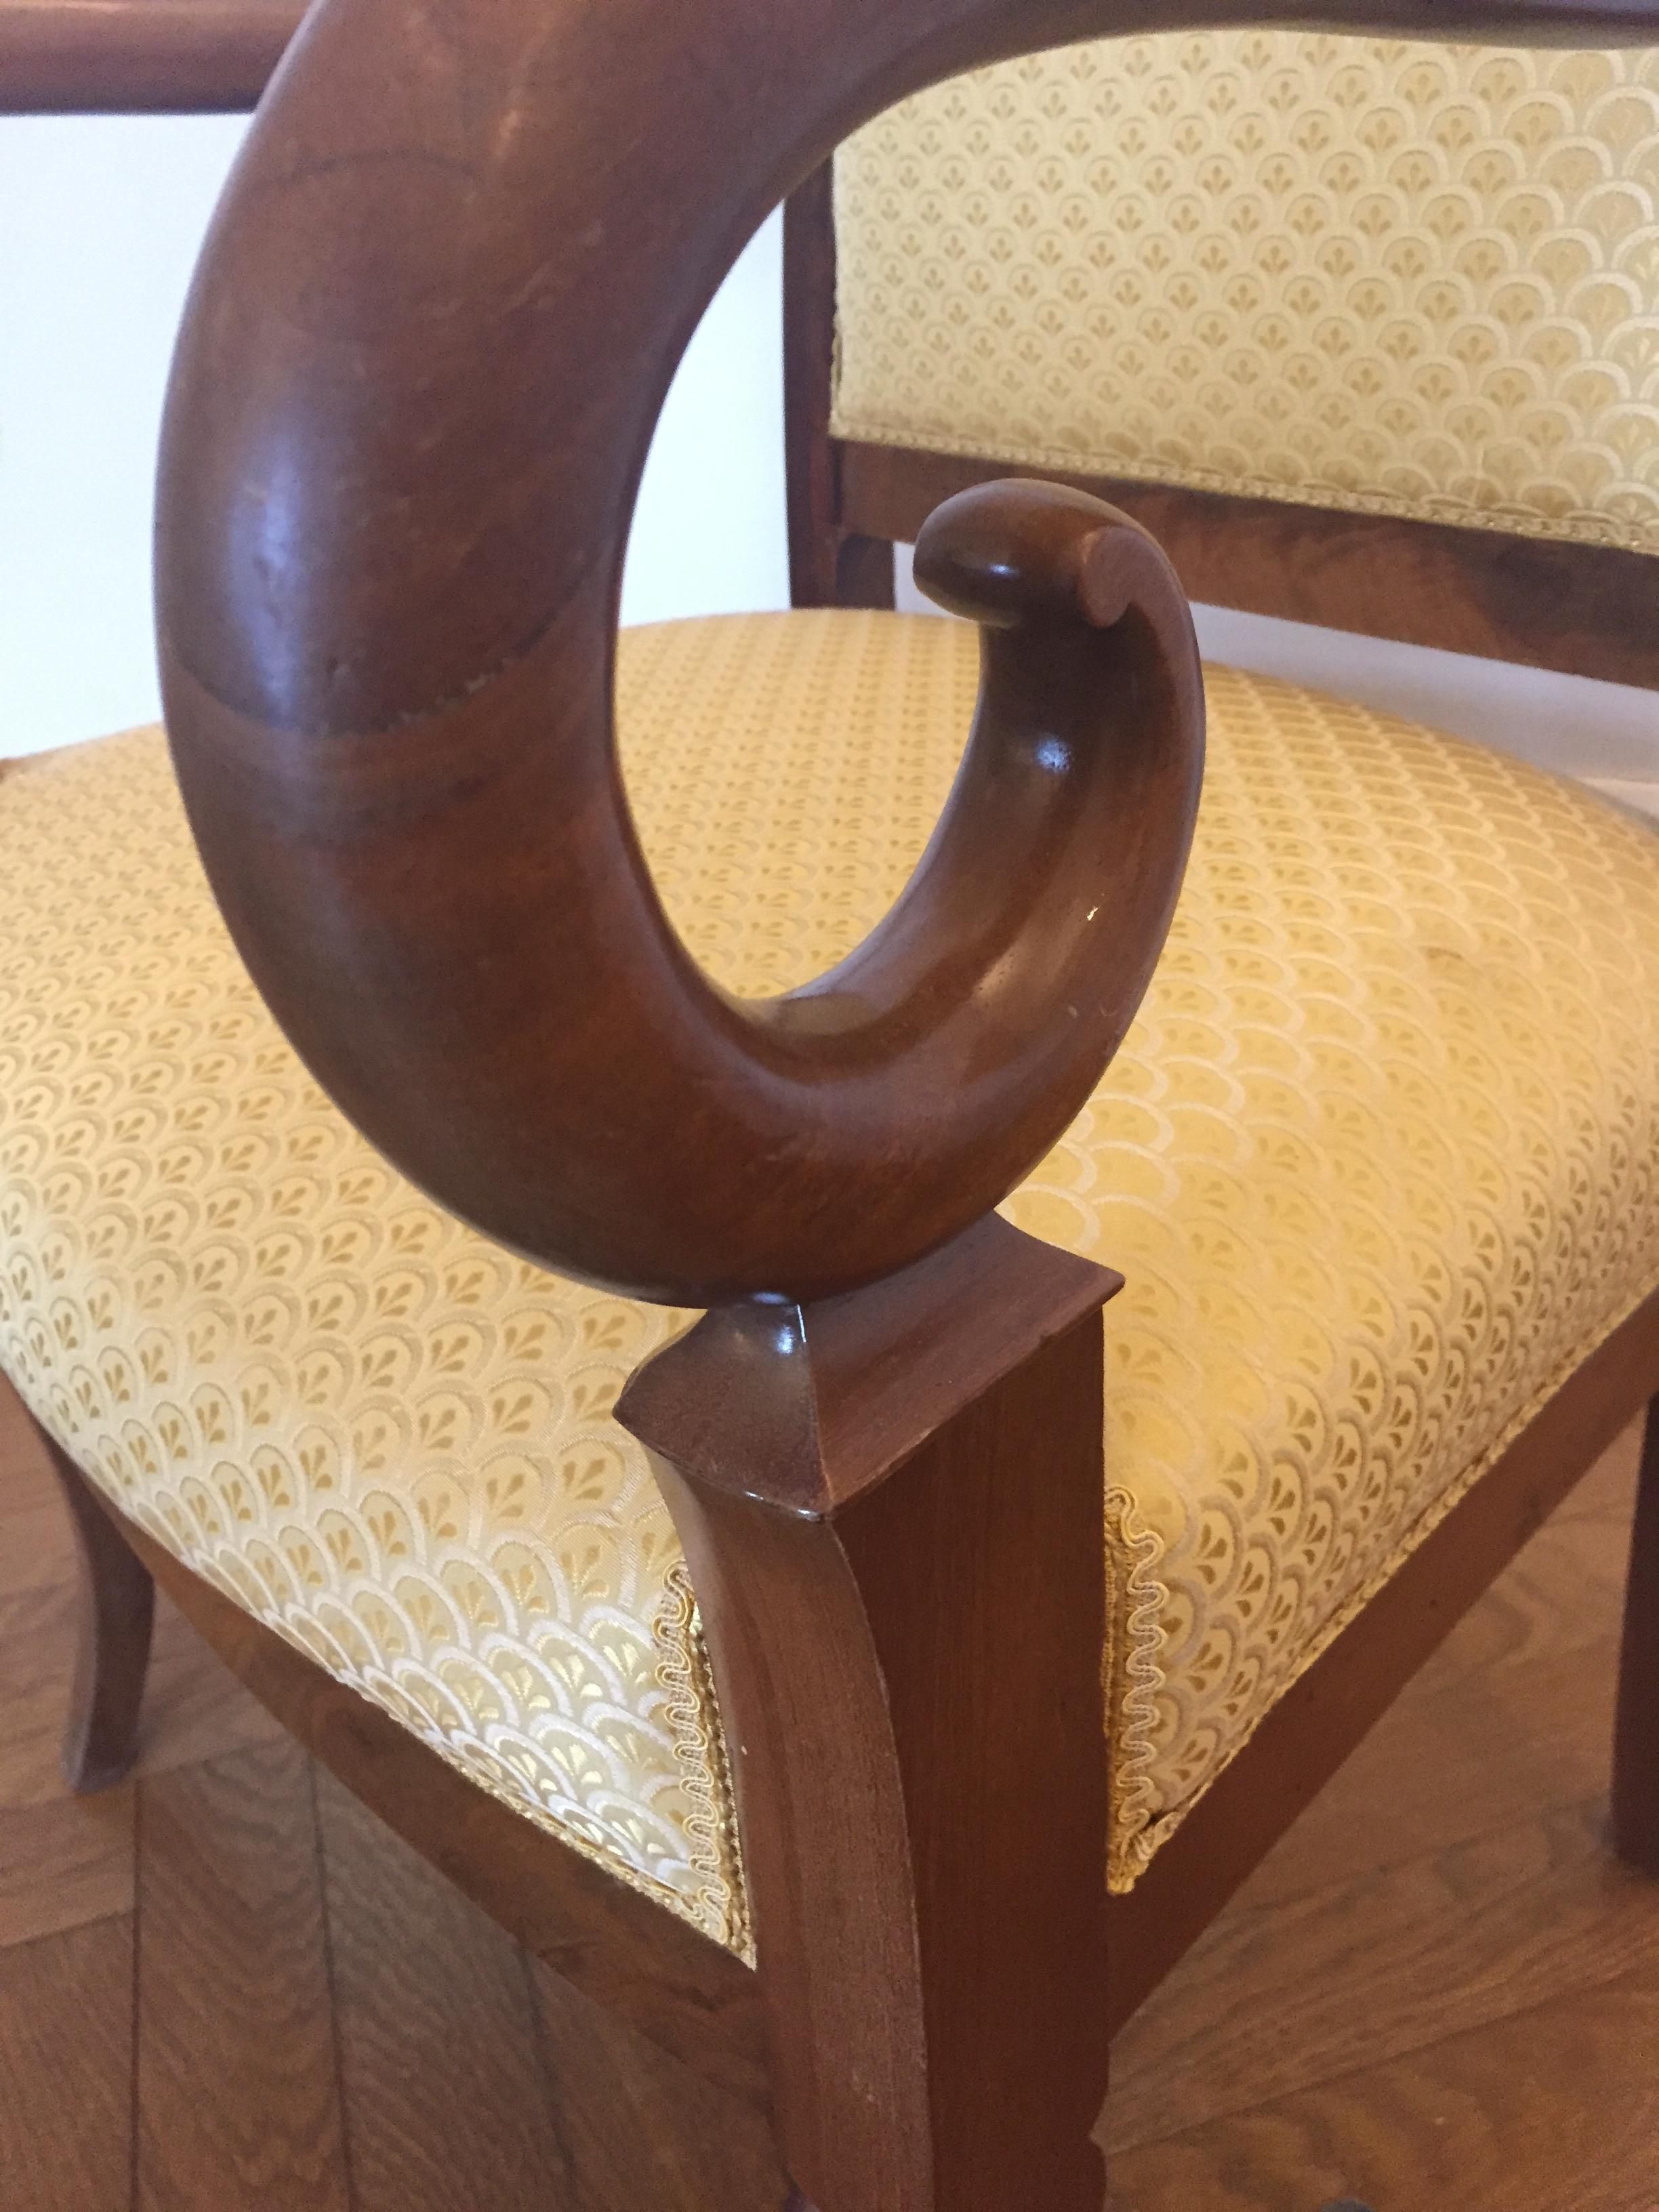 Elegant and great design for this pair of French mahogany armchairs recovered with a yellow silk fabric
The lines of the armrest is an elegant curved design, as well for the front and back legs.
Very good condition.